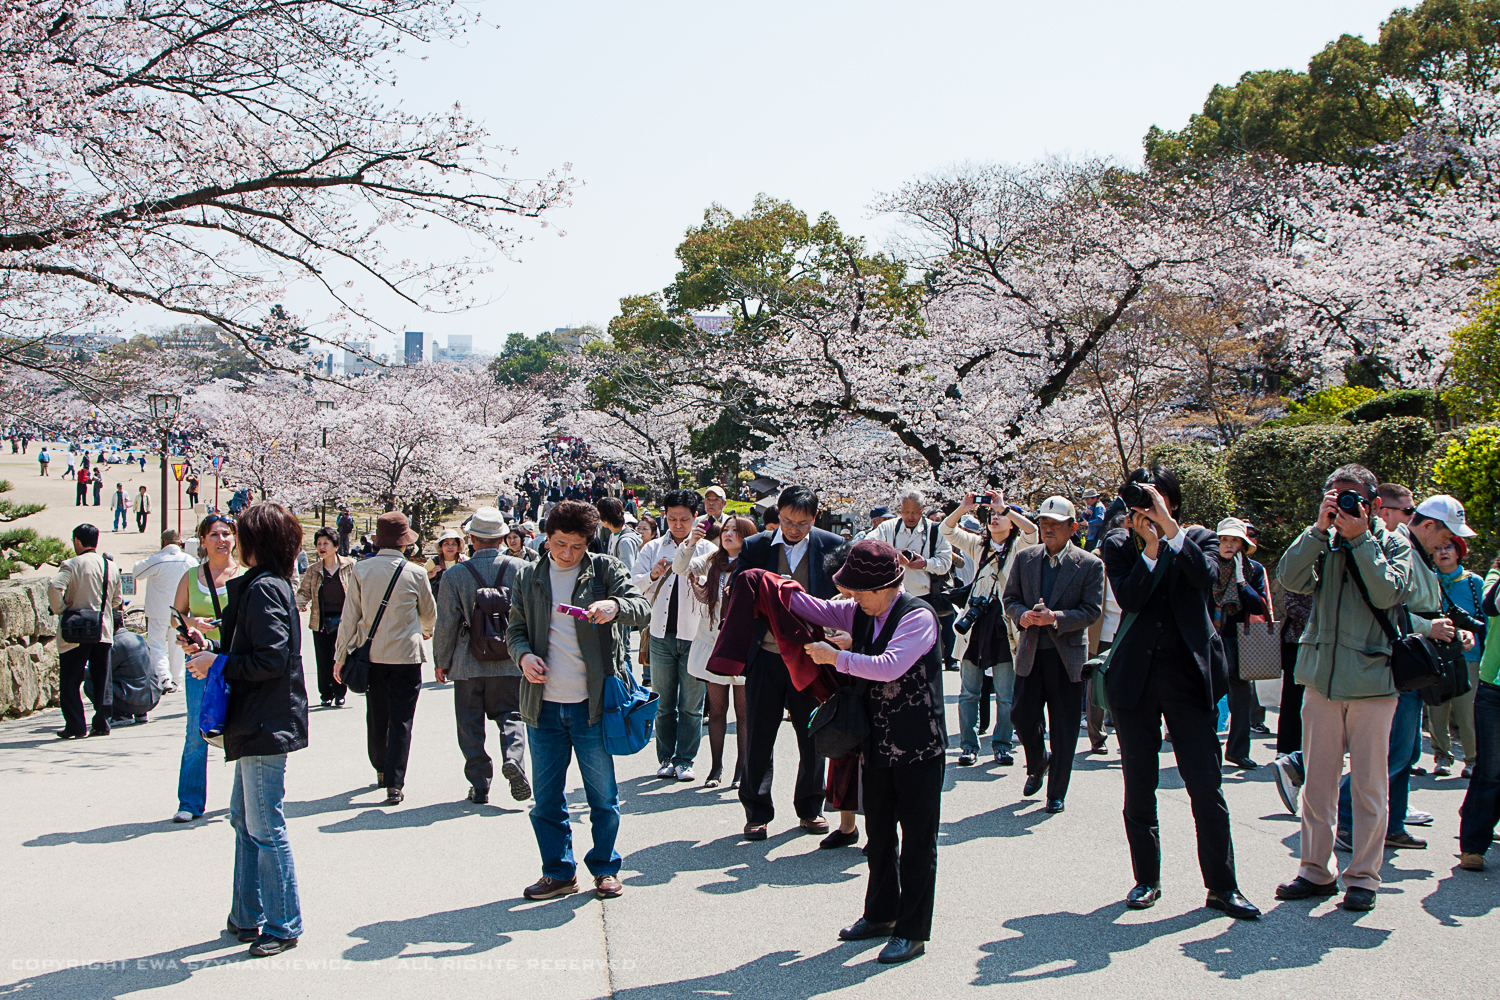 Photographing cherry blossom